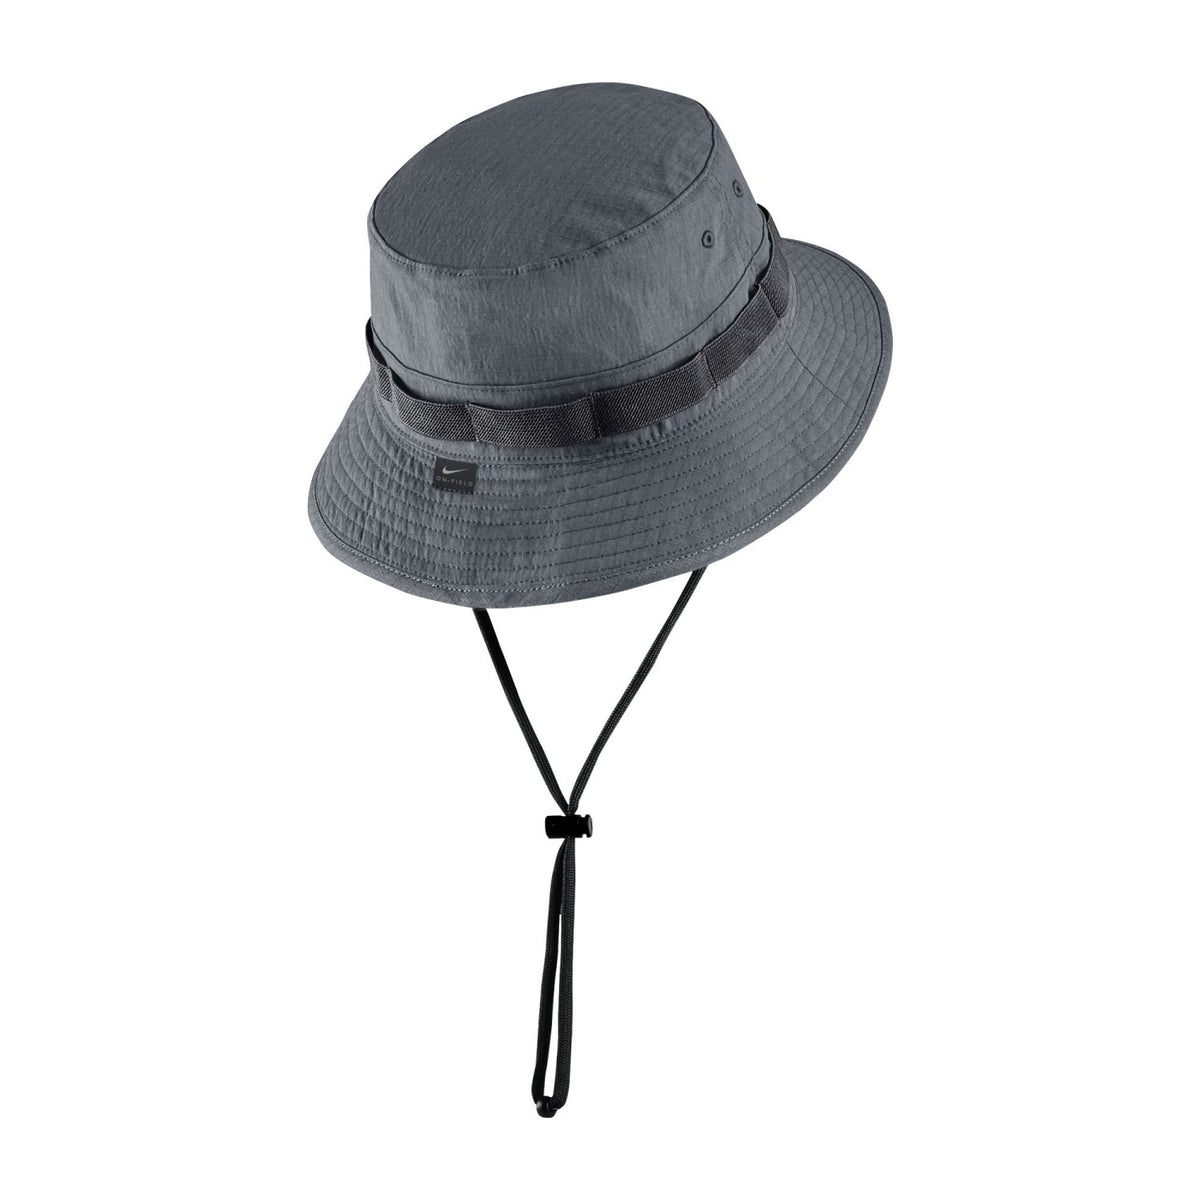 Nike Bucket Hat Pewter Gray - Central College Spirit Shoppe